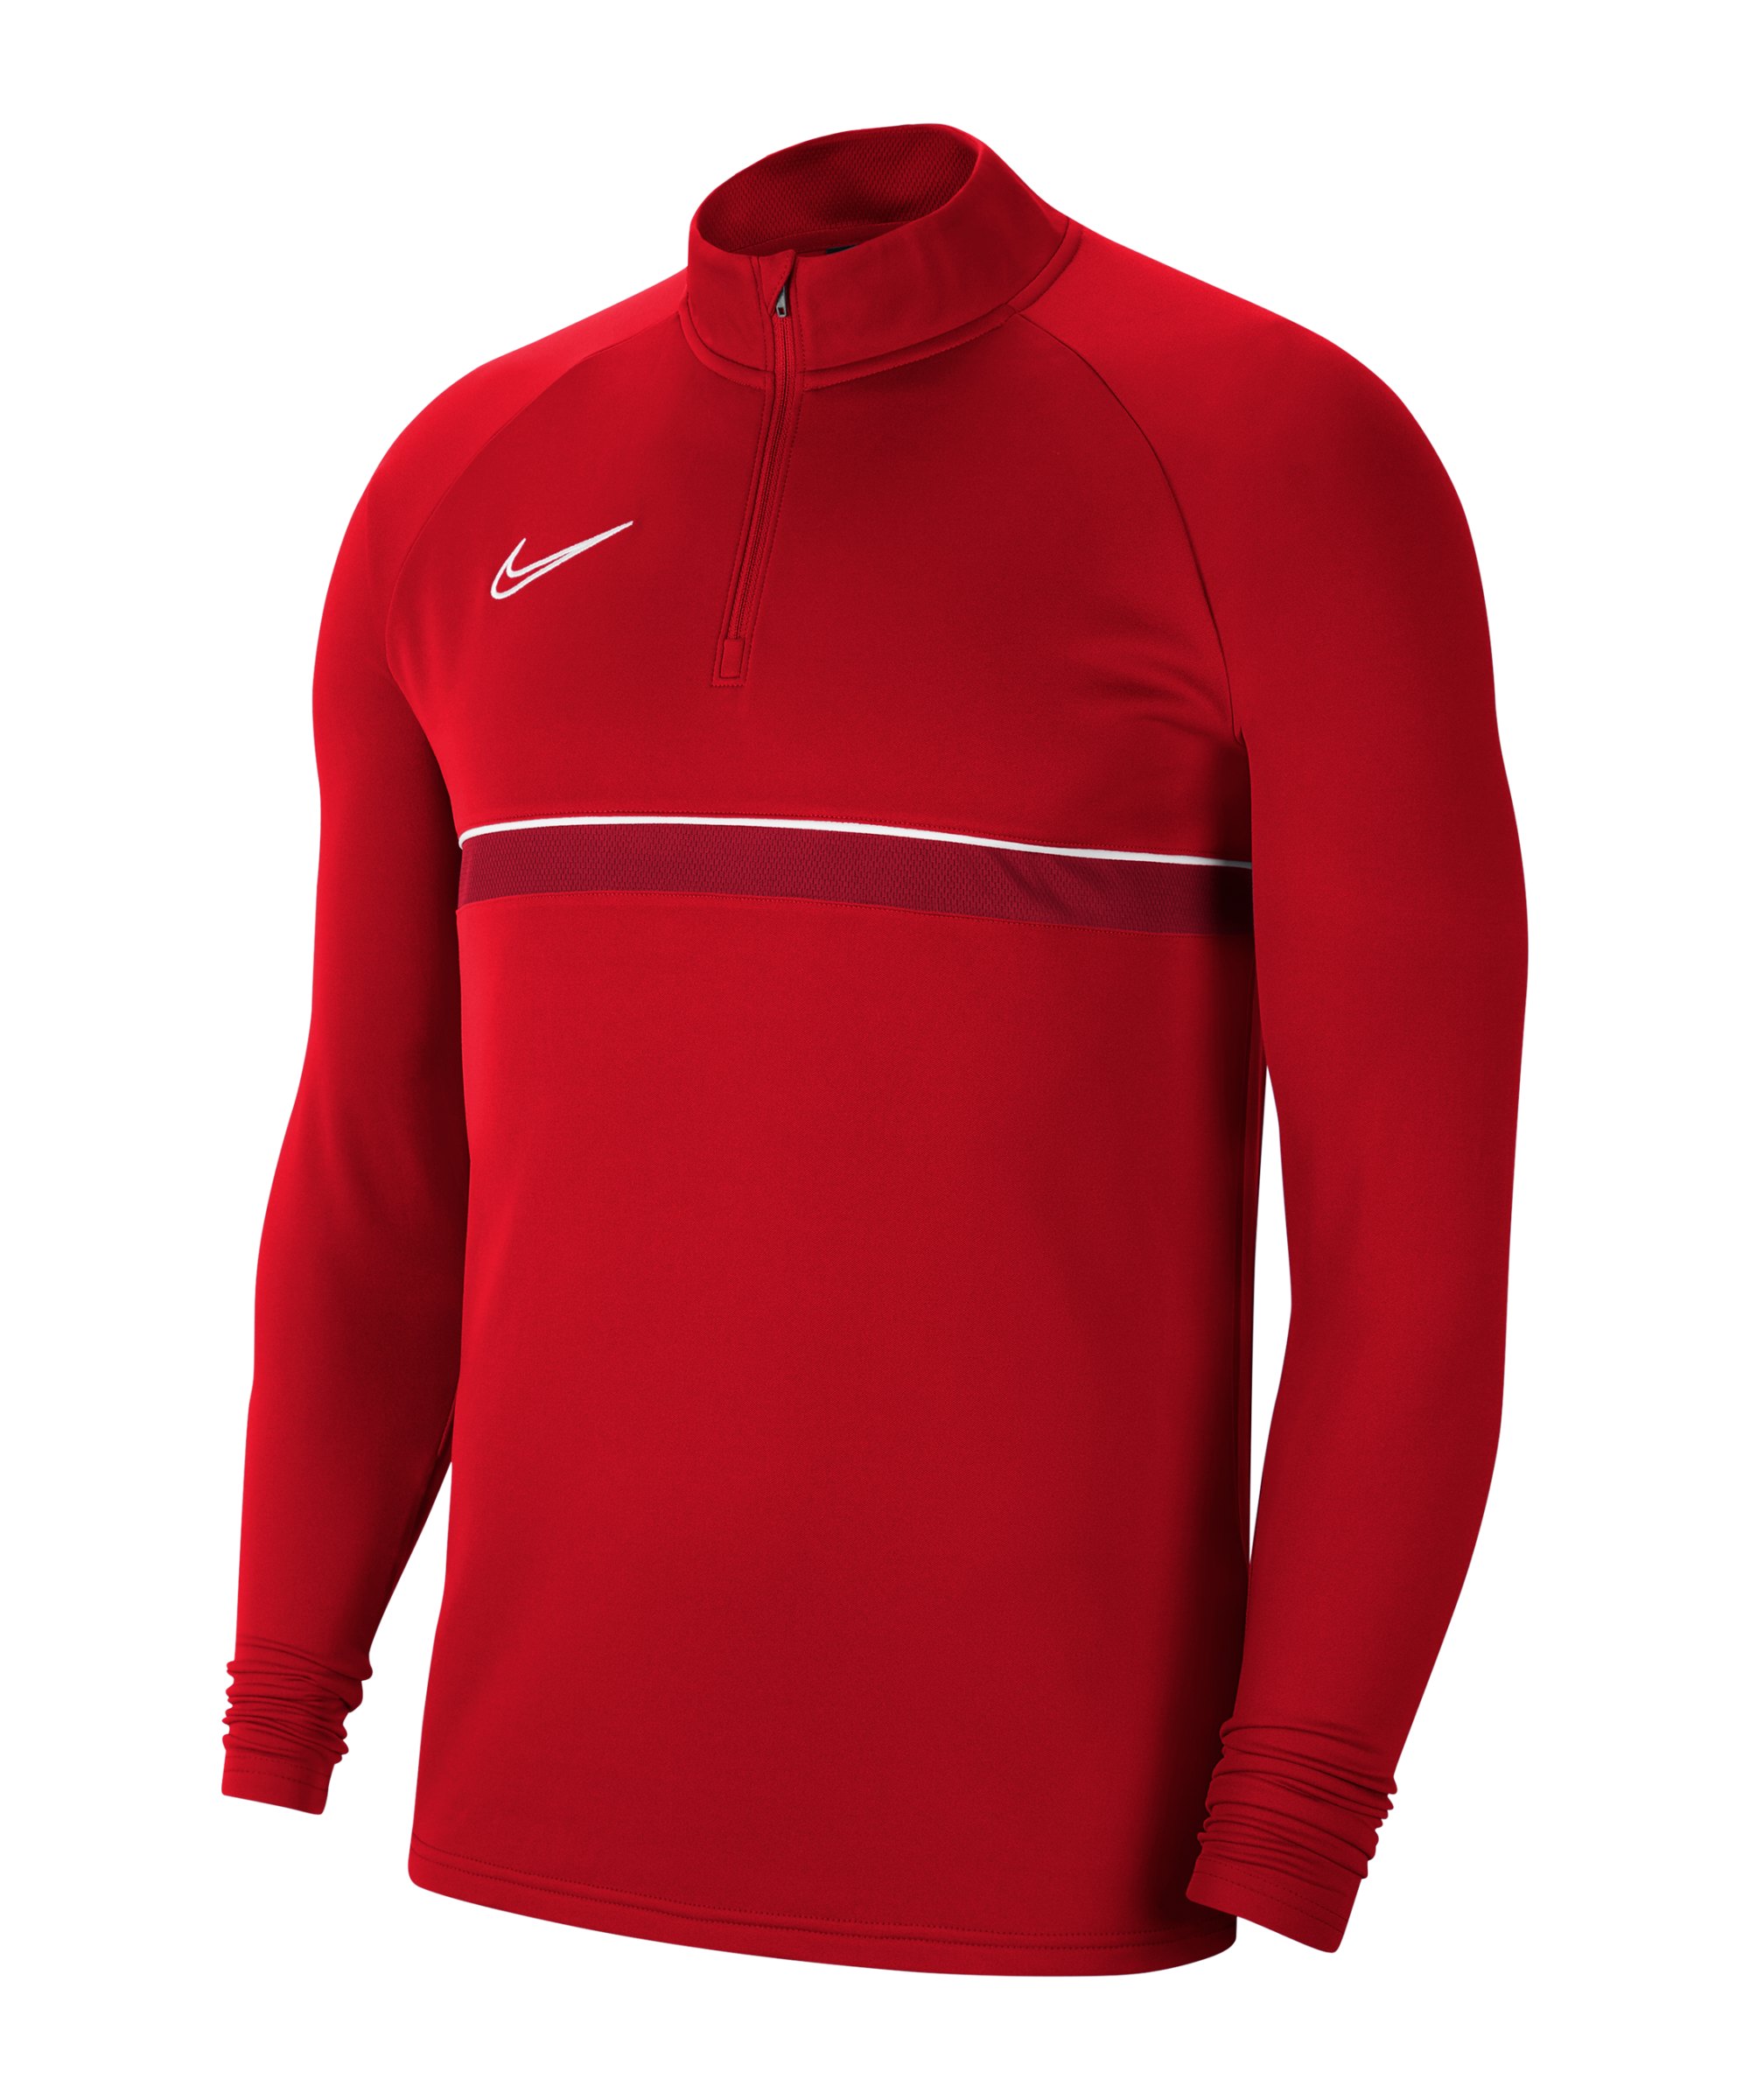 Nike Academy 21 Drill Top Rot Weiss F657 - rot